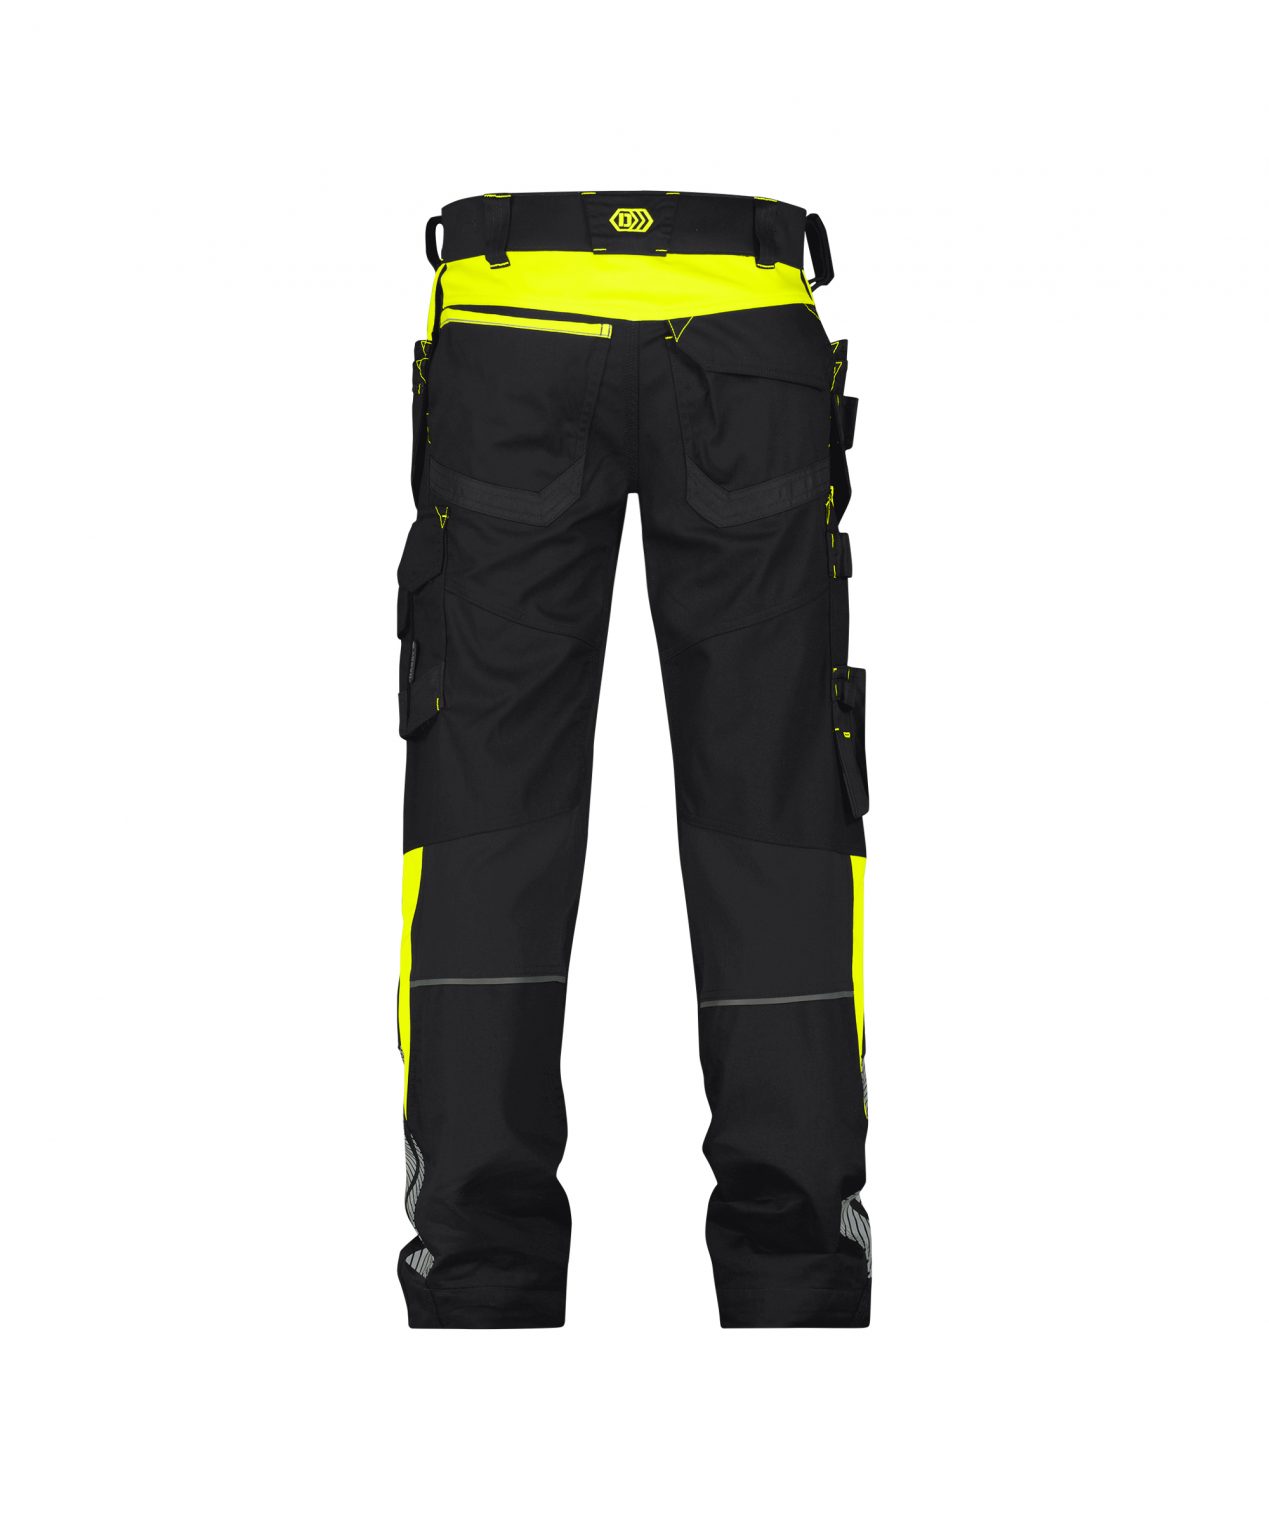 shanghai stretch work trousers with holster pockets and knee pockets black fluo yellow back